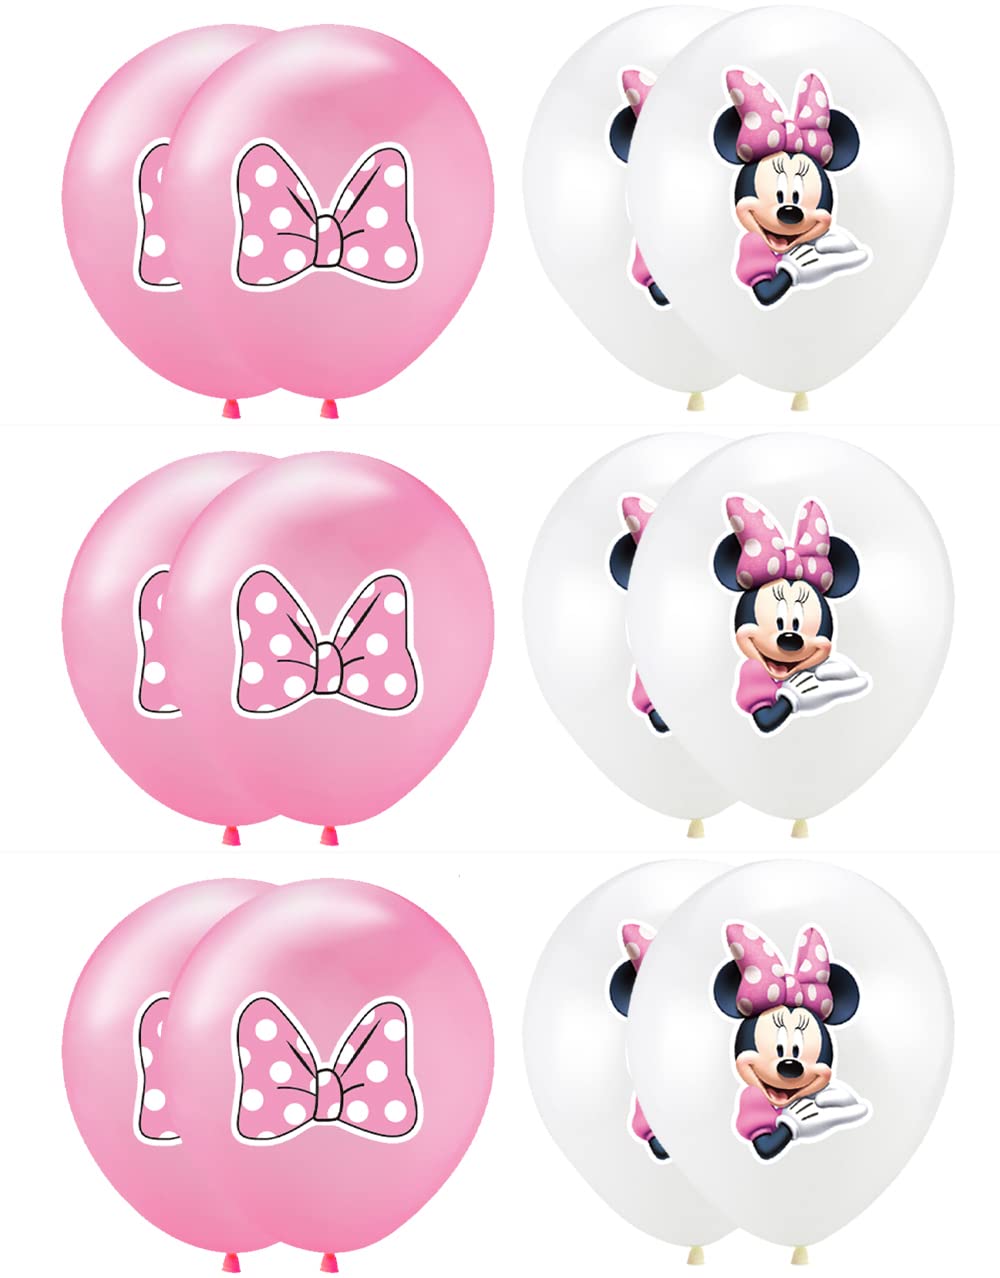 18pcs Minnie Mickey Mouse Birthday Party Balloons, Minnie Mickey Mouse Party Balloons Kids Party Supplies Decorations Favors (Balloons 18pcs)